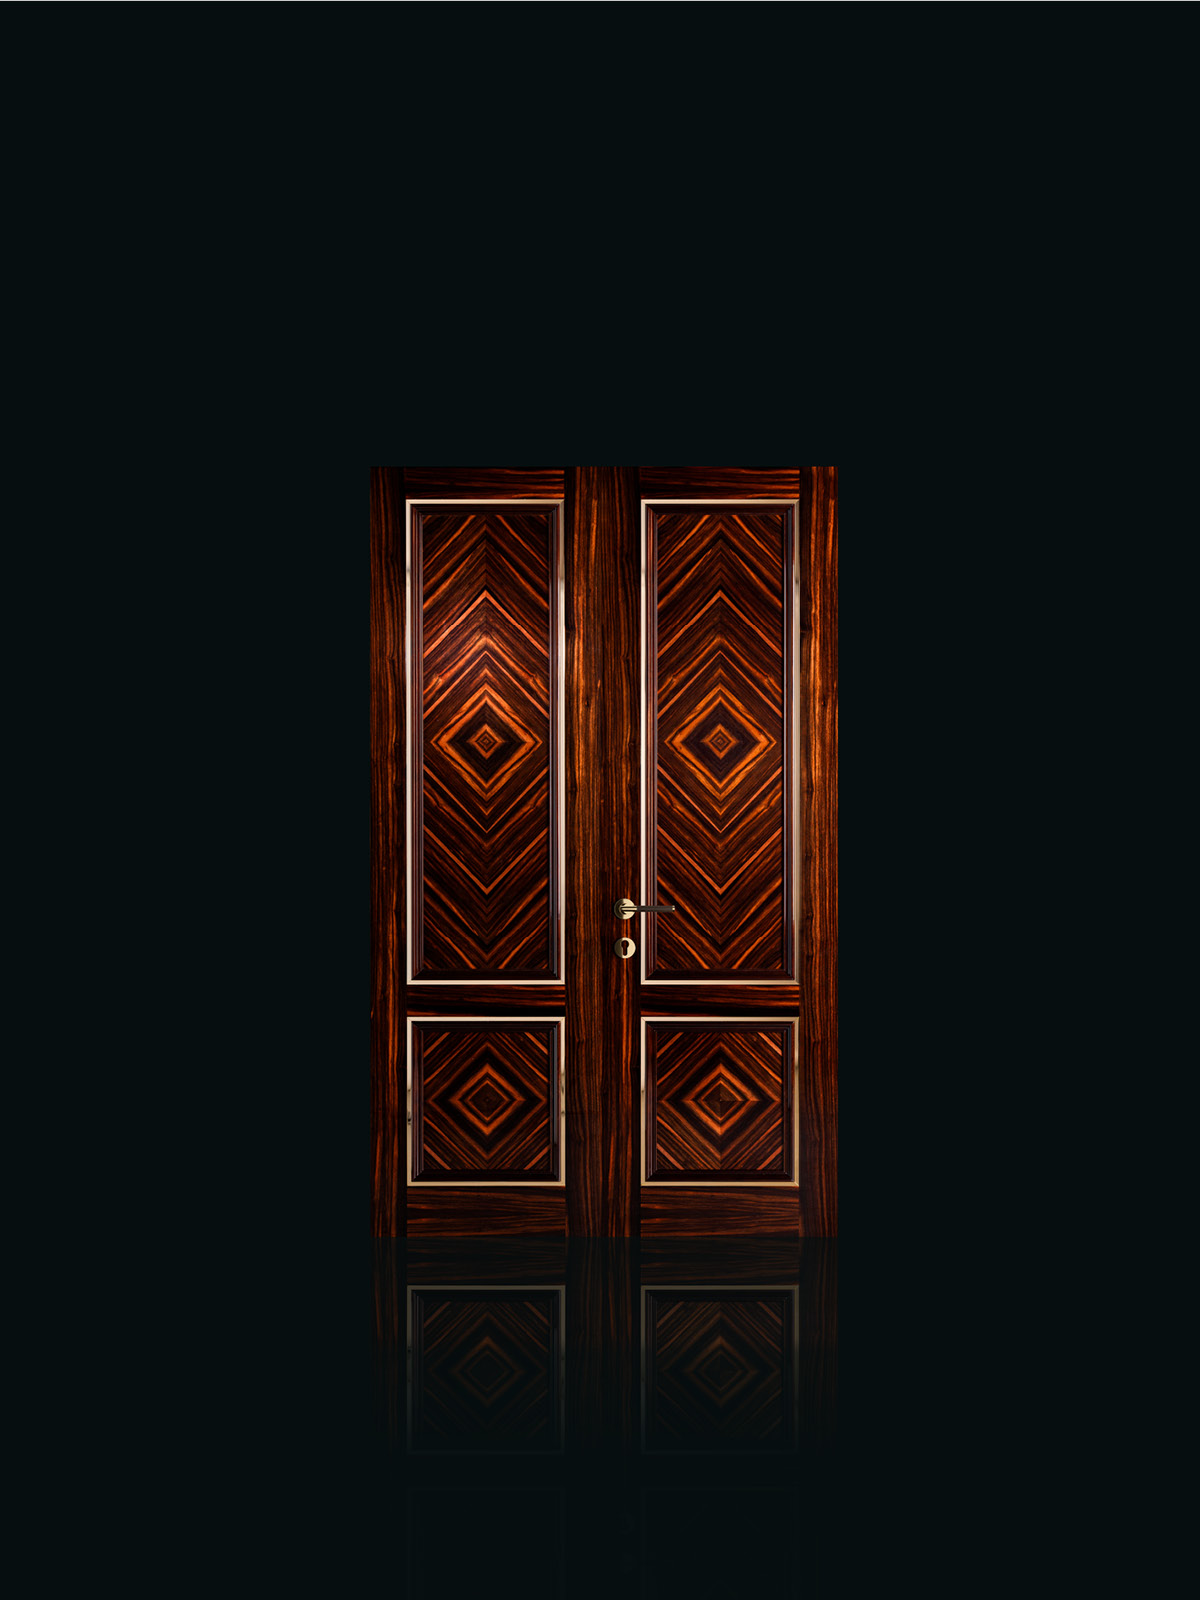 Paneling and doors in ebony with polished brass inlays